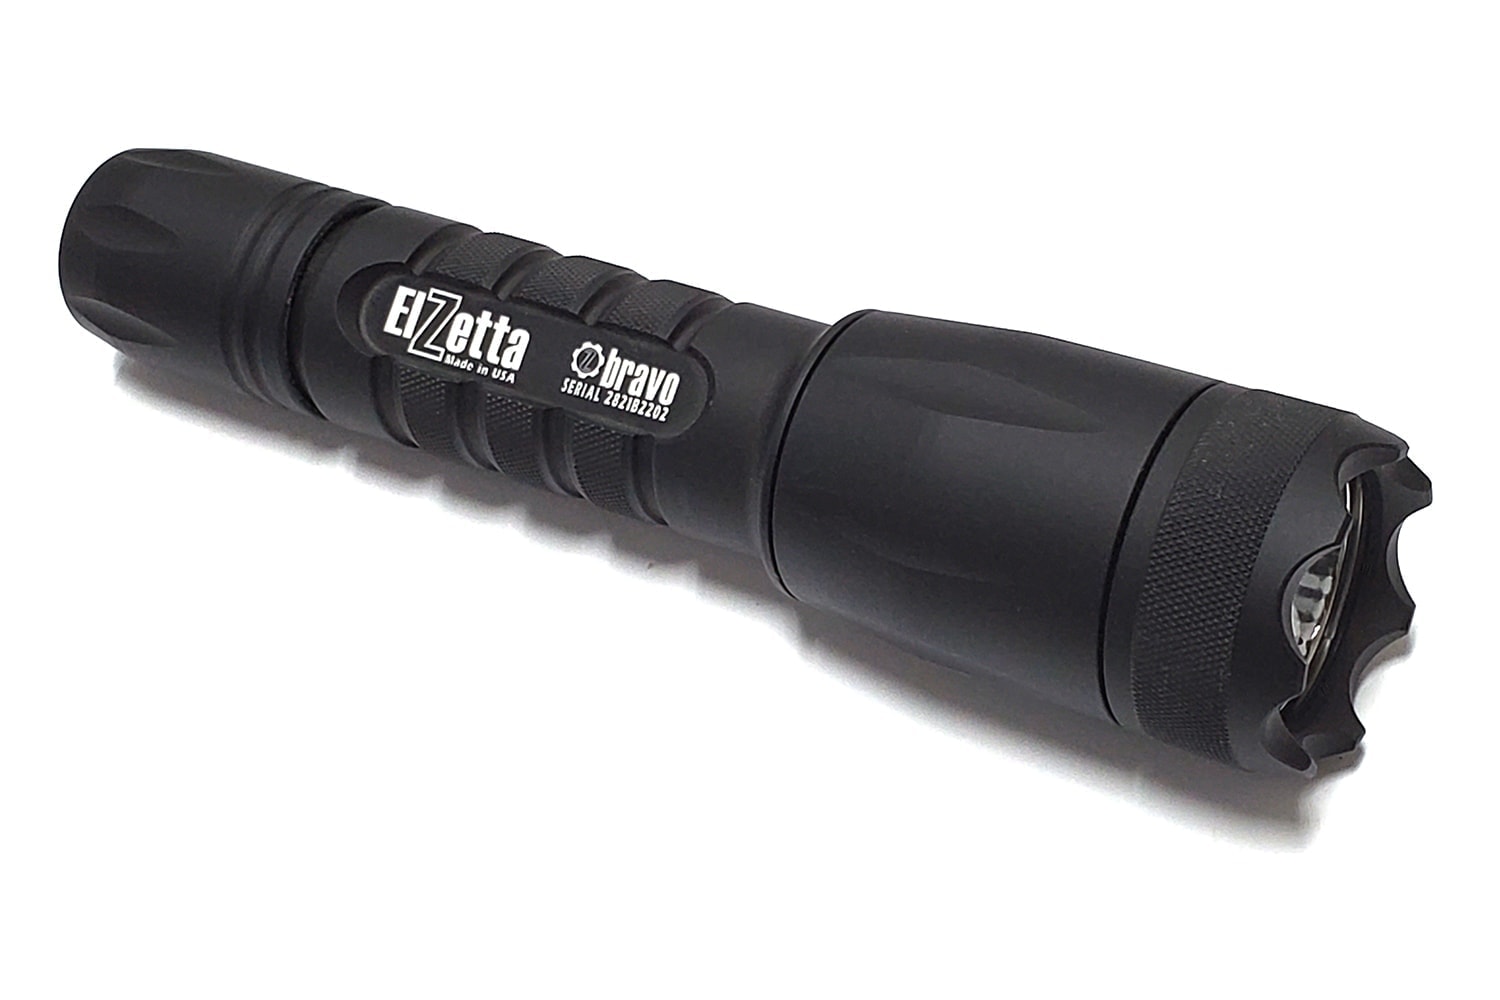 Elzetta Bravo High Candela 2-Cell Flashlight with Crenelated Bezel and Click Tailcap